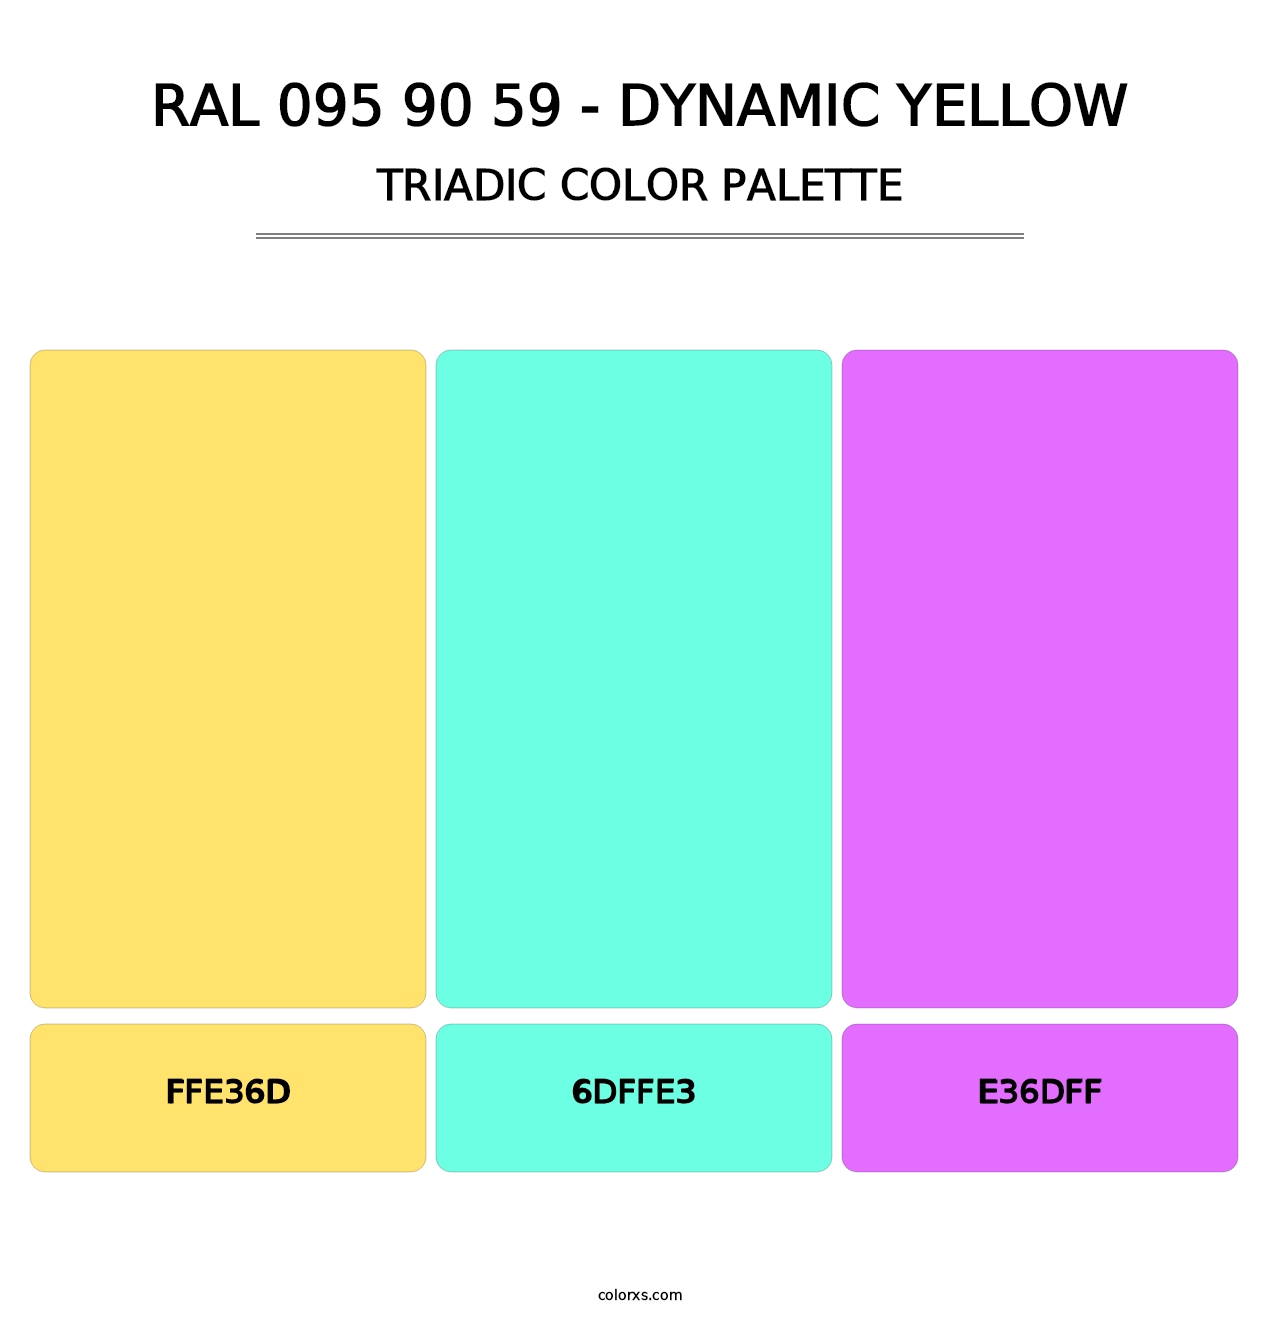 RAL 095 90 59 - Dynamic Yellow - Triadic Color Palette